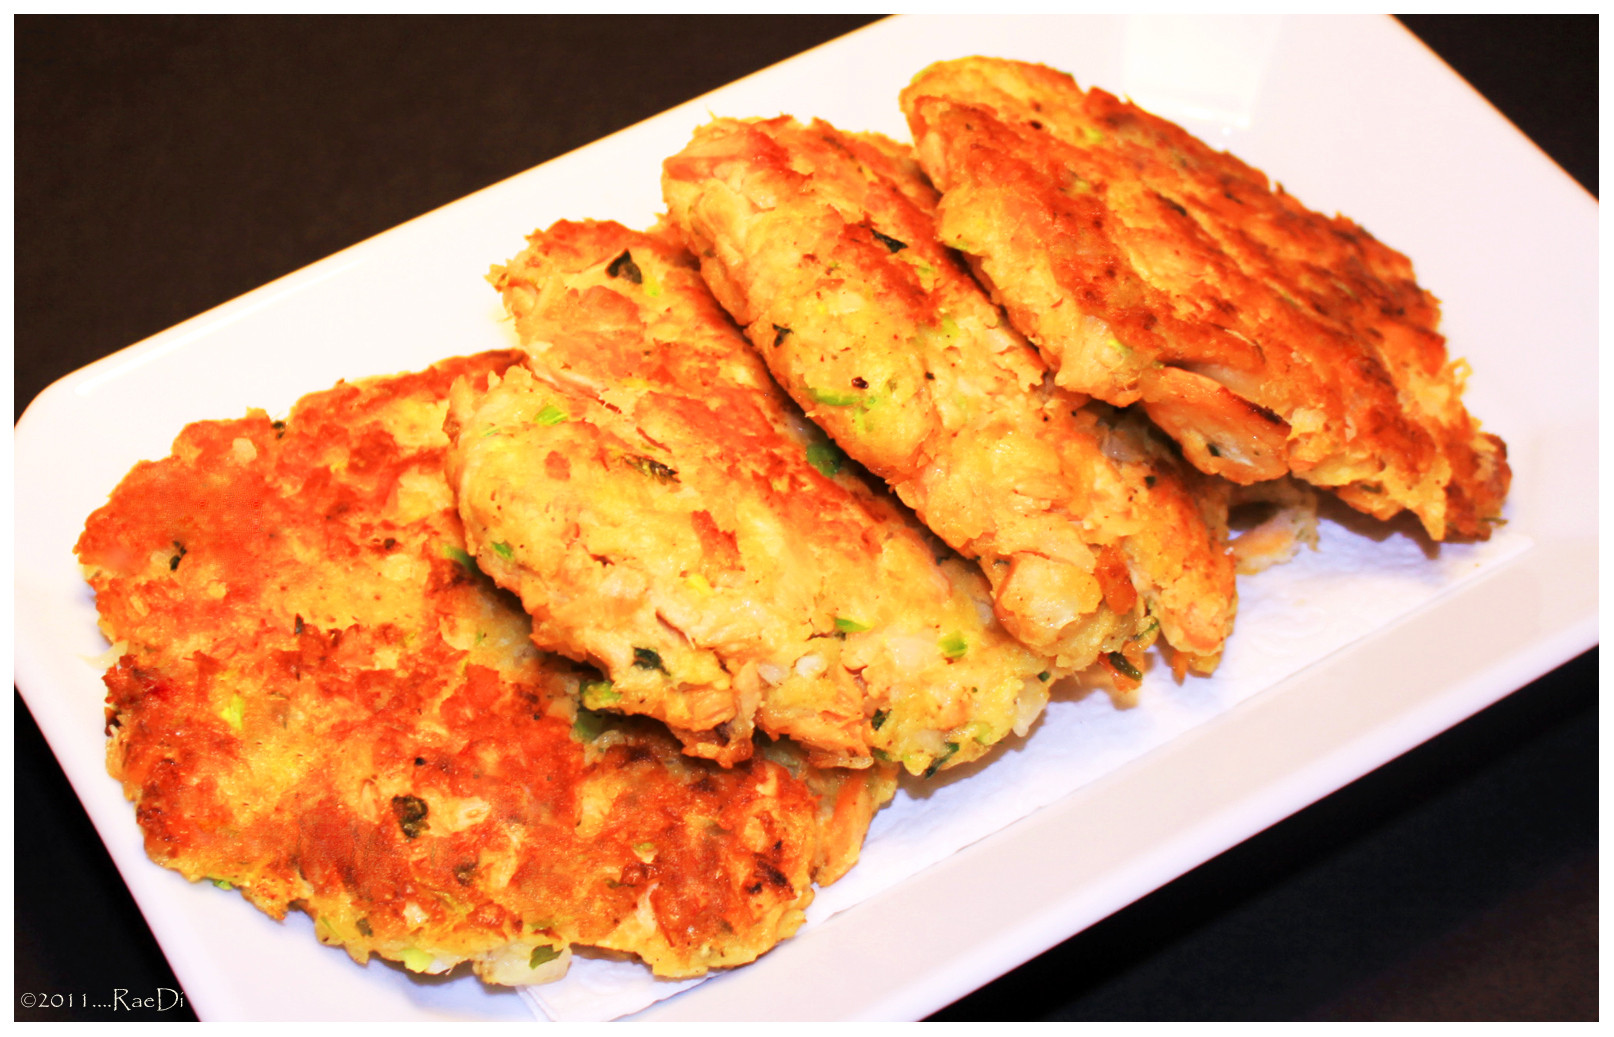 Salmon Patties In Oven
 Recipe For Salmon Patties Baked In Oven